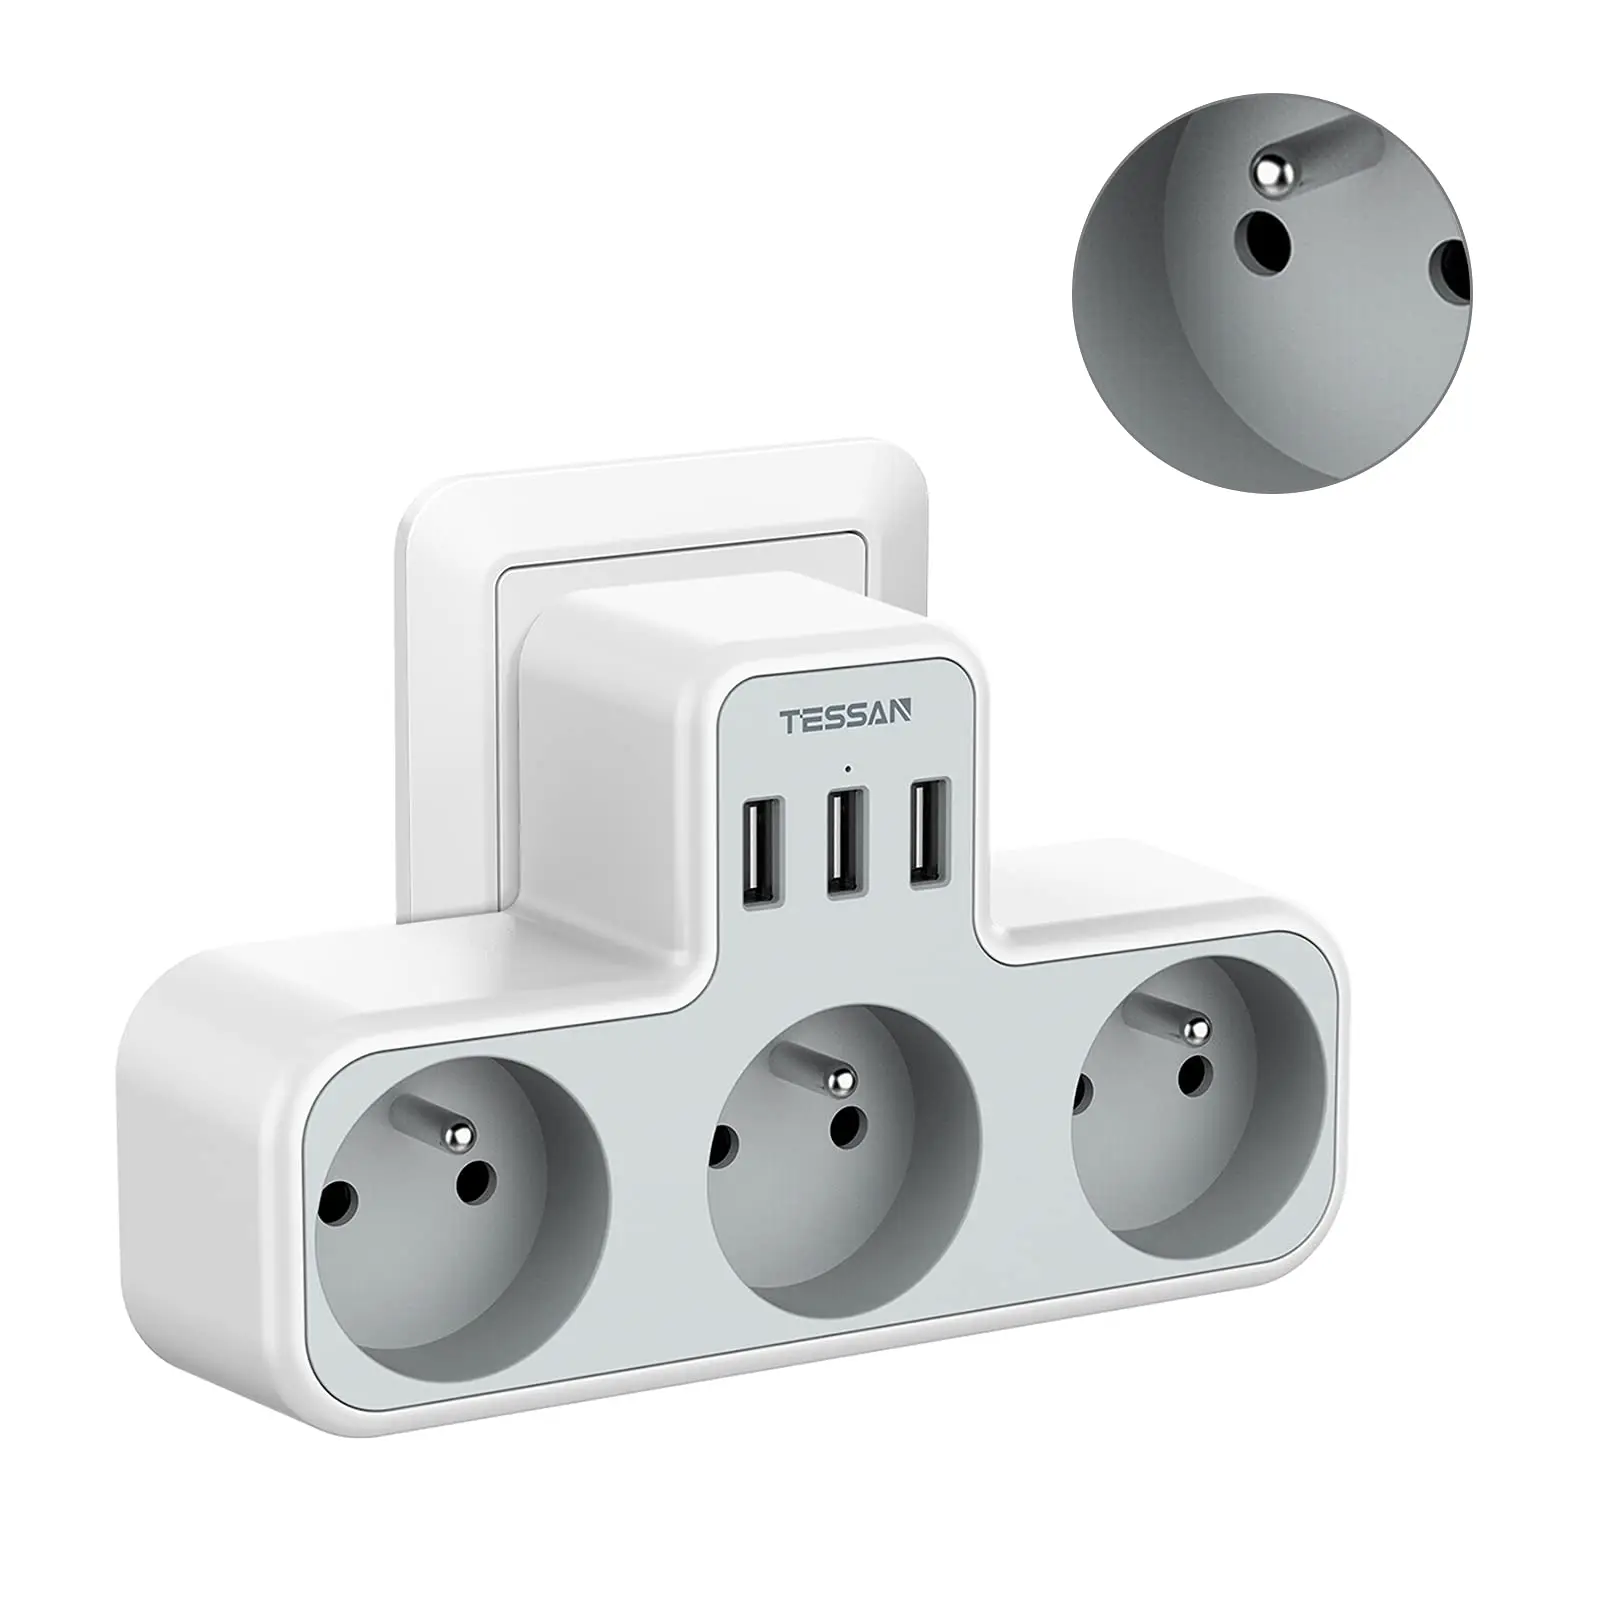 TESSAN 6 in 1 USB Multiple Mains Socket Extend 3 French Sockets with 3 USB Charger Ports (3A), USB Wall Charger for Home, Office